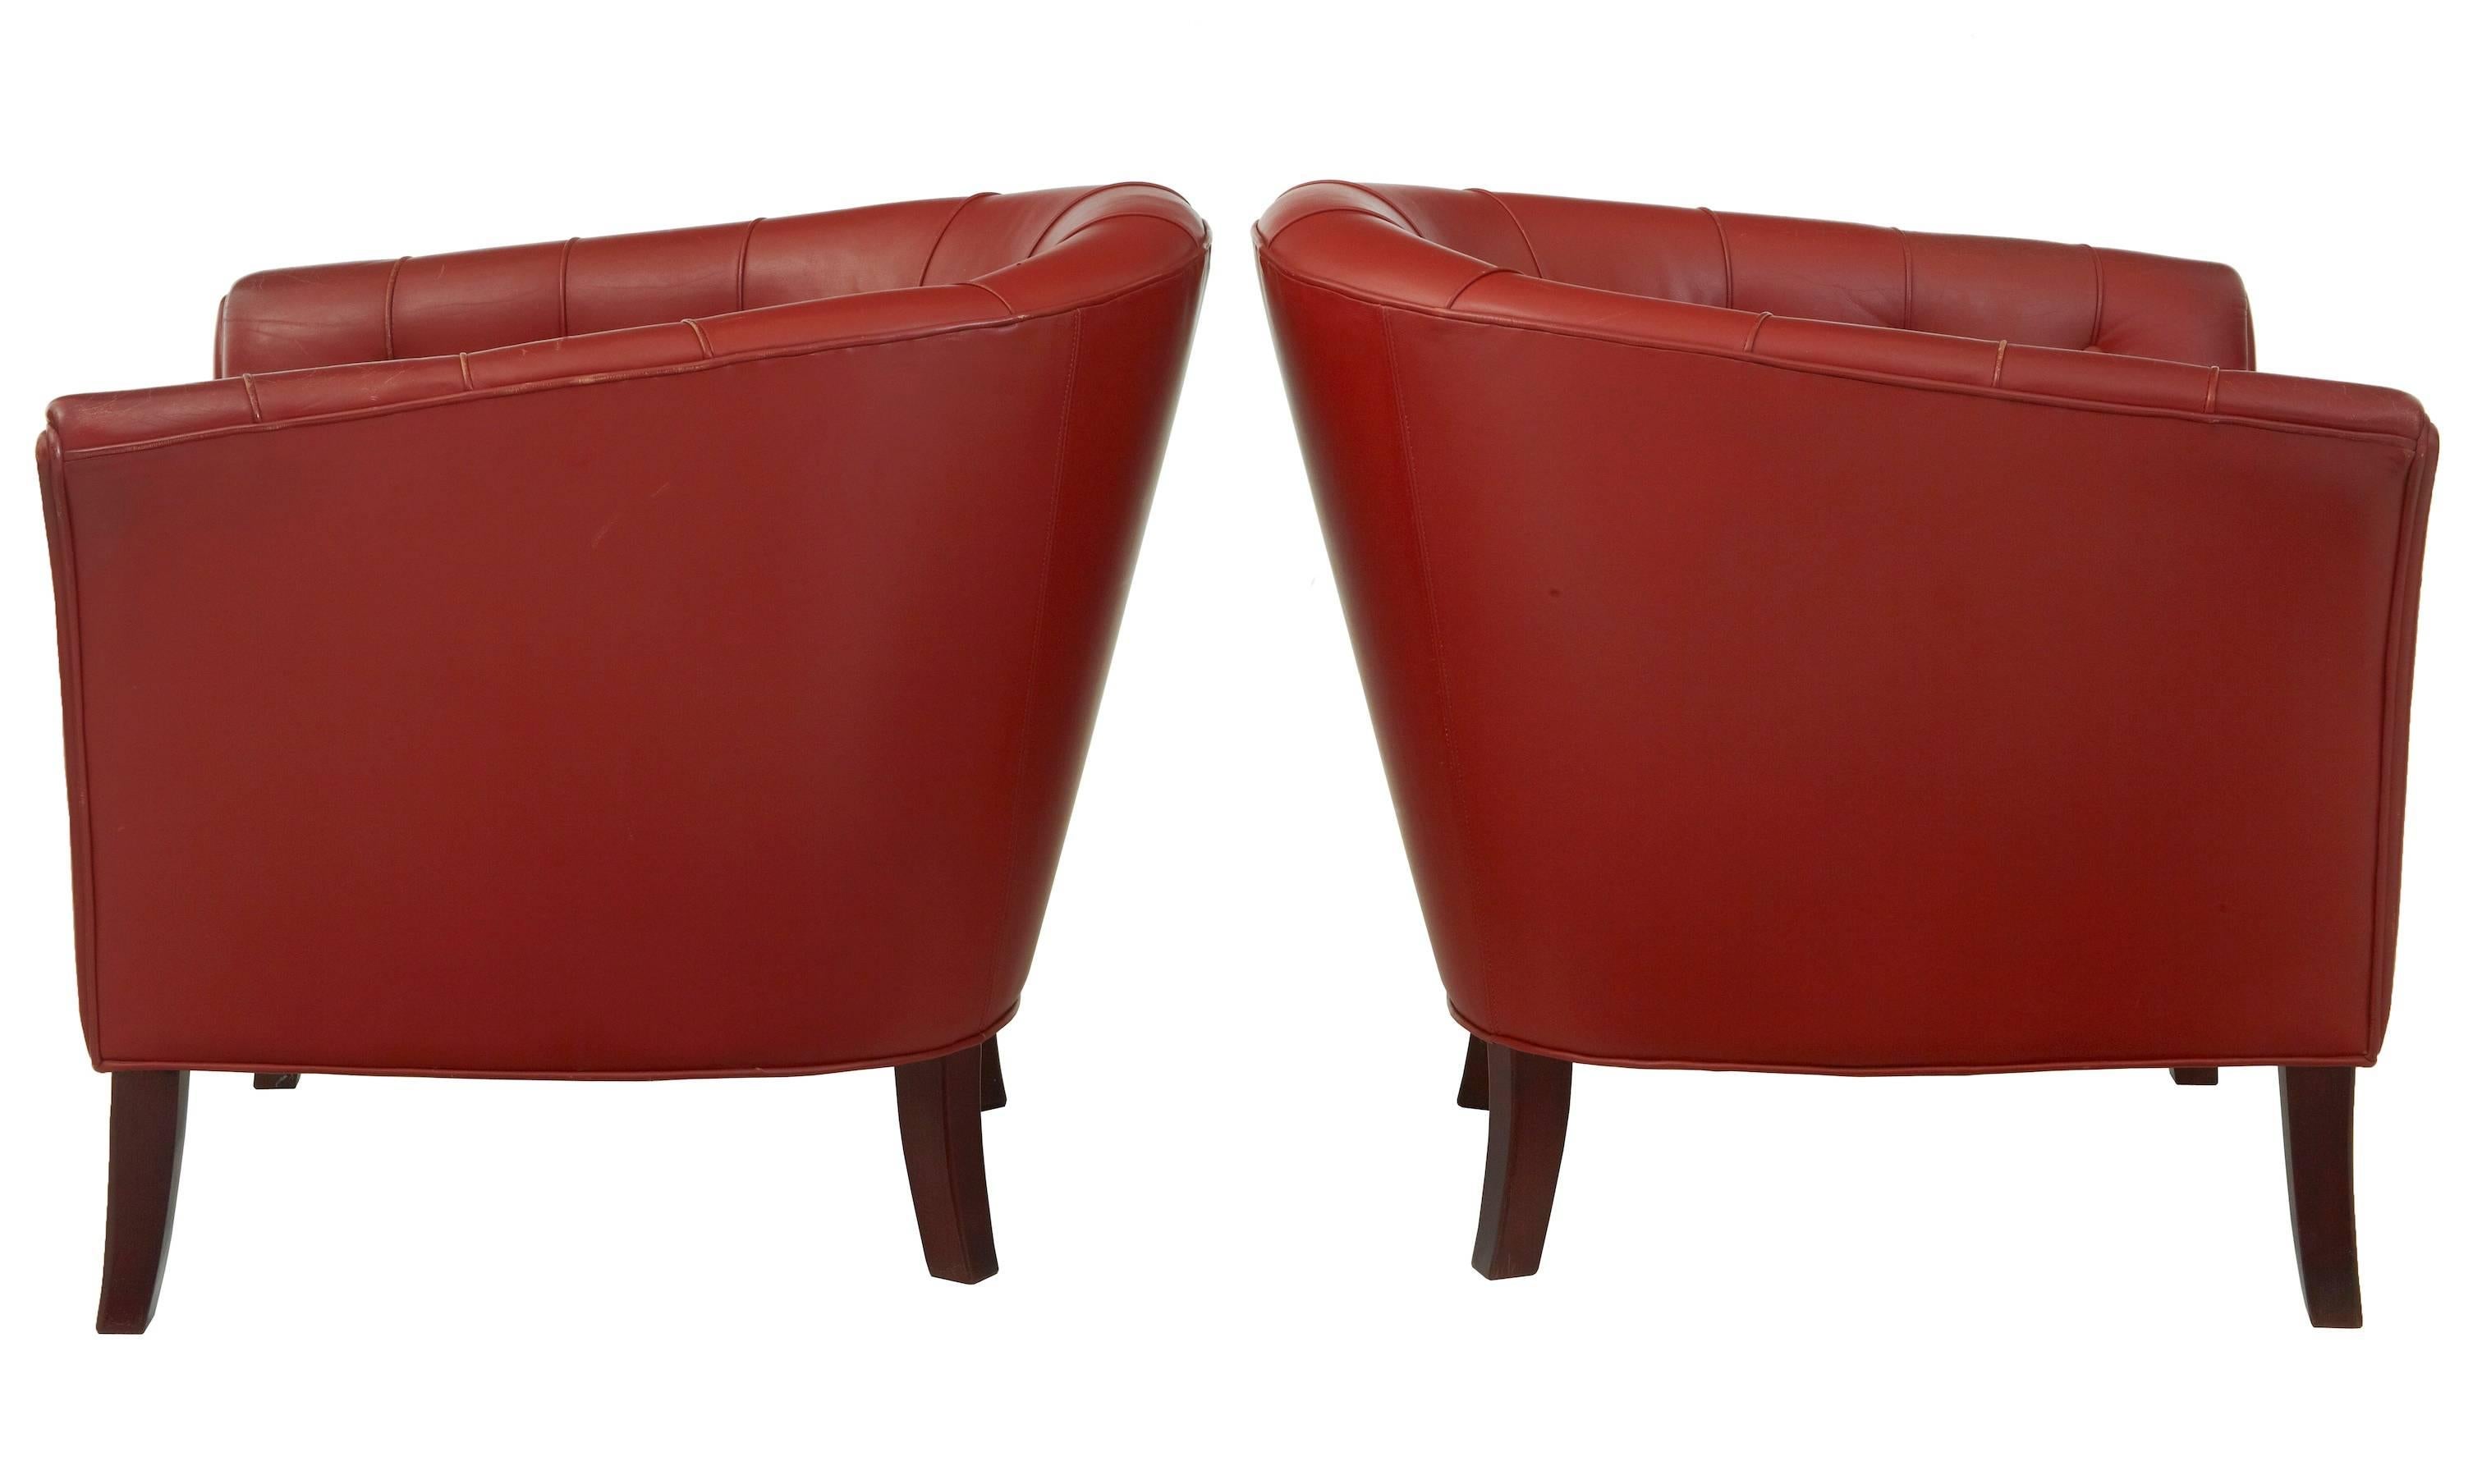 Fine quality leather lounge club armchairs.
Upholstered in rusty red leather.
Mahogany colored tapering legs.
Very comfortable and stylish.

Minor wear to arms, minor scuffing to reverse.

Measures: Height: 28